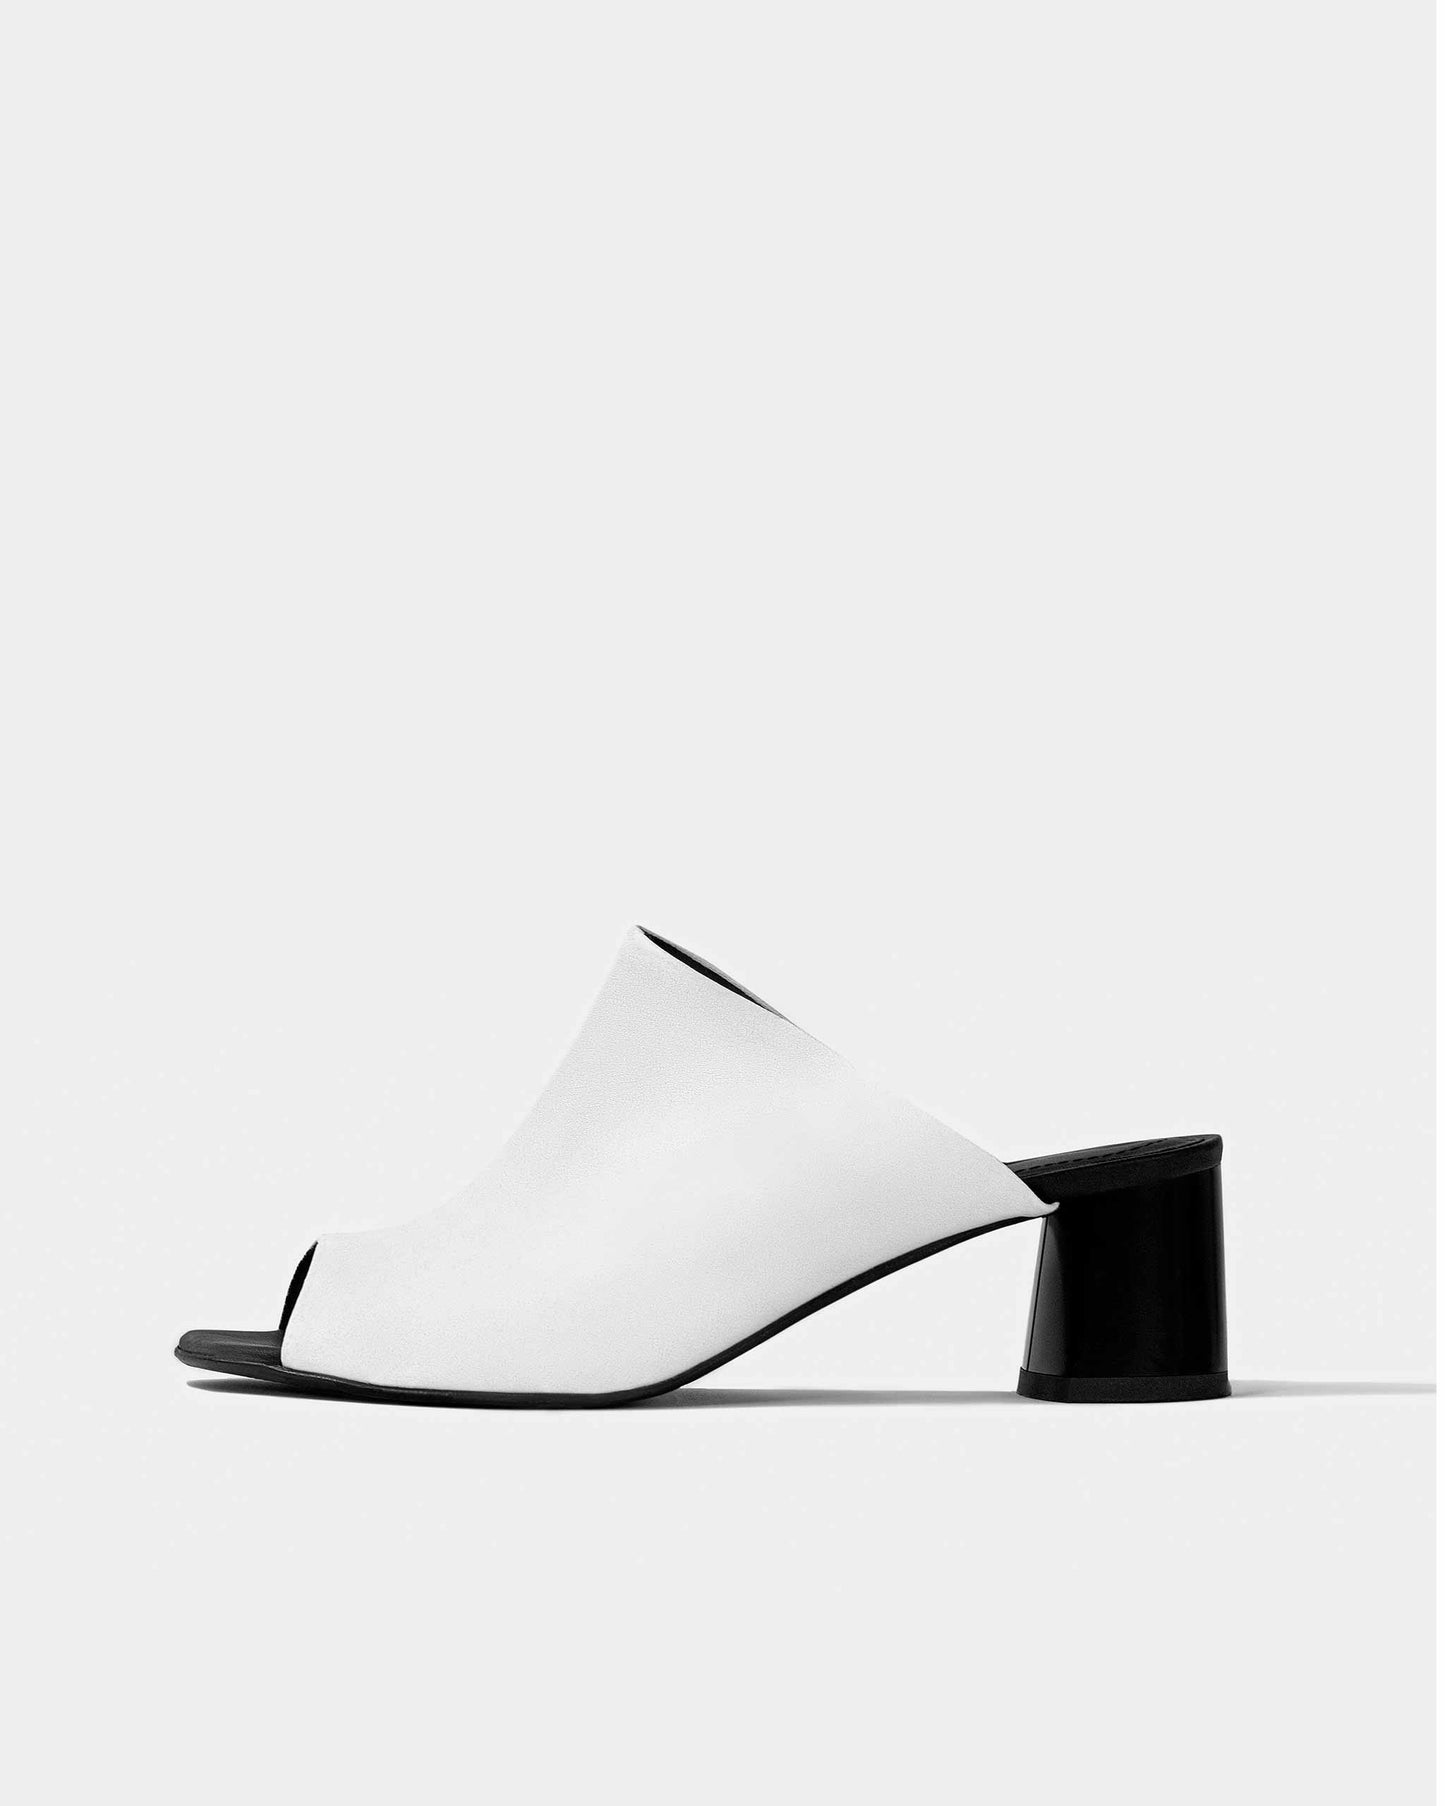 Uptown White Nopal cactus leather sandals